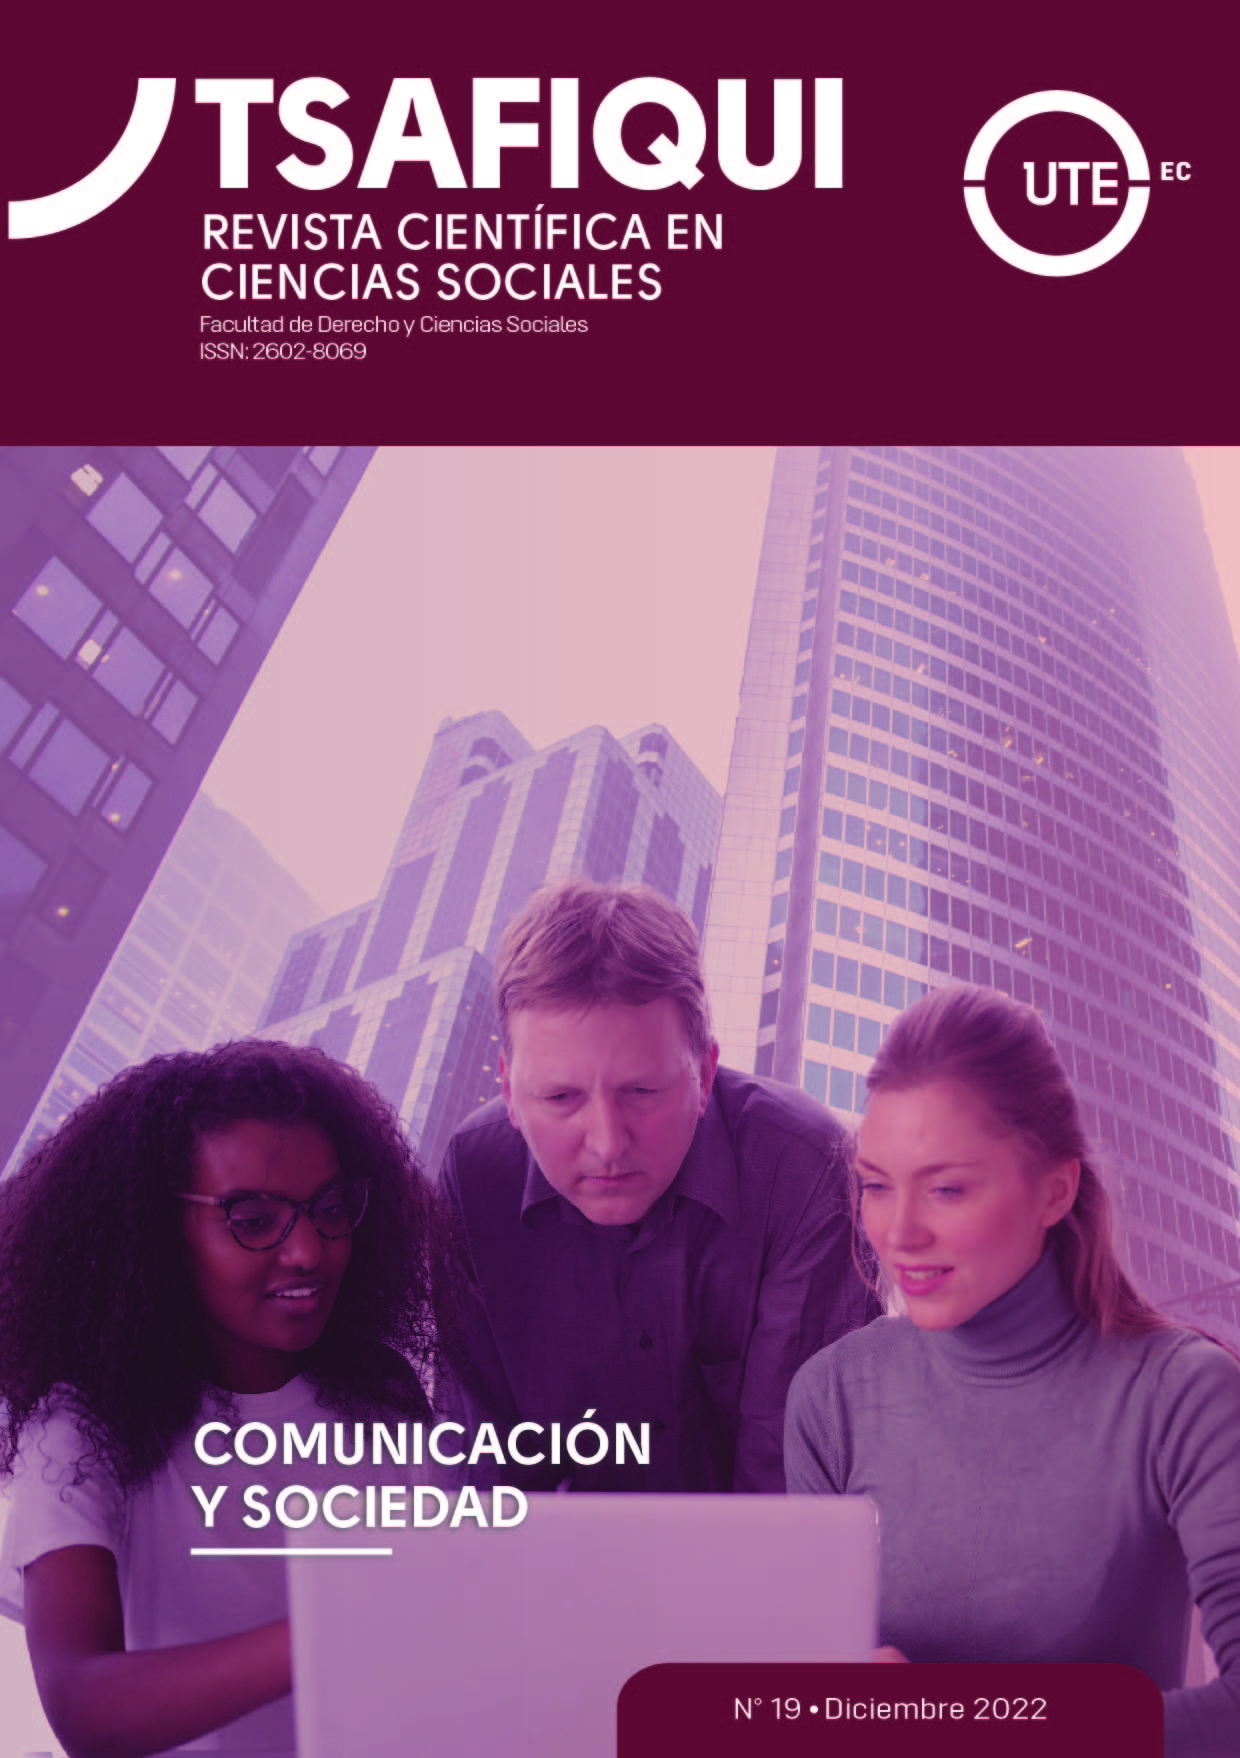 					View Vol. 12 No. 3 (2022): Communication and society
				